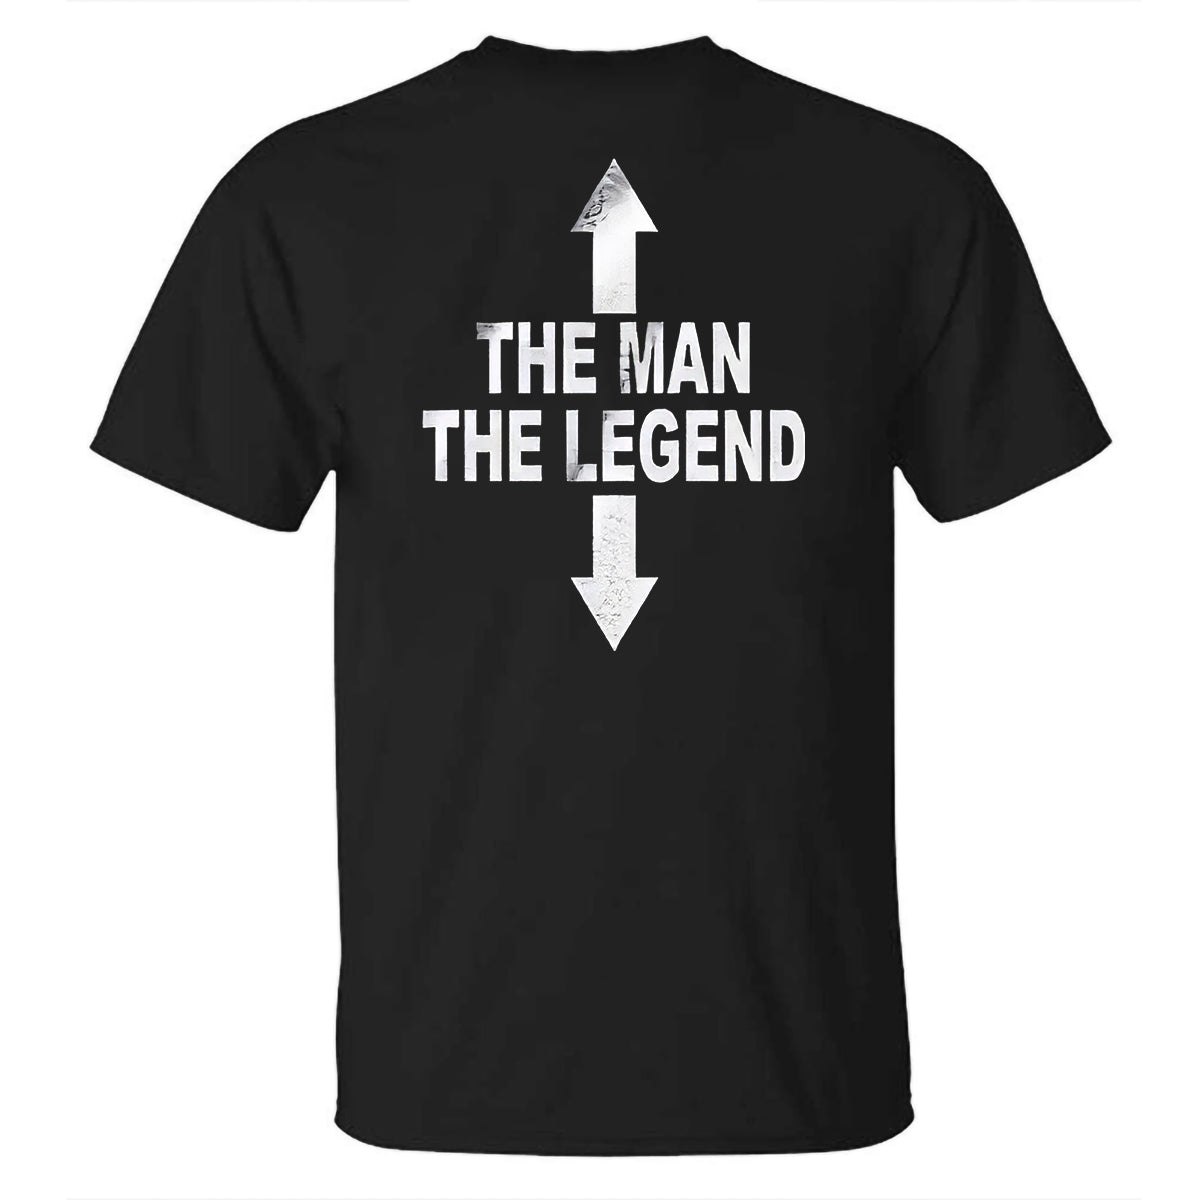 GrootWear The Man The Legend Printed T-shirt